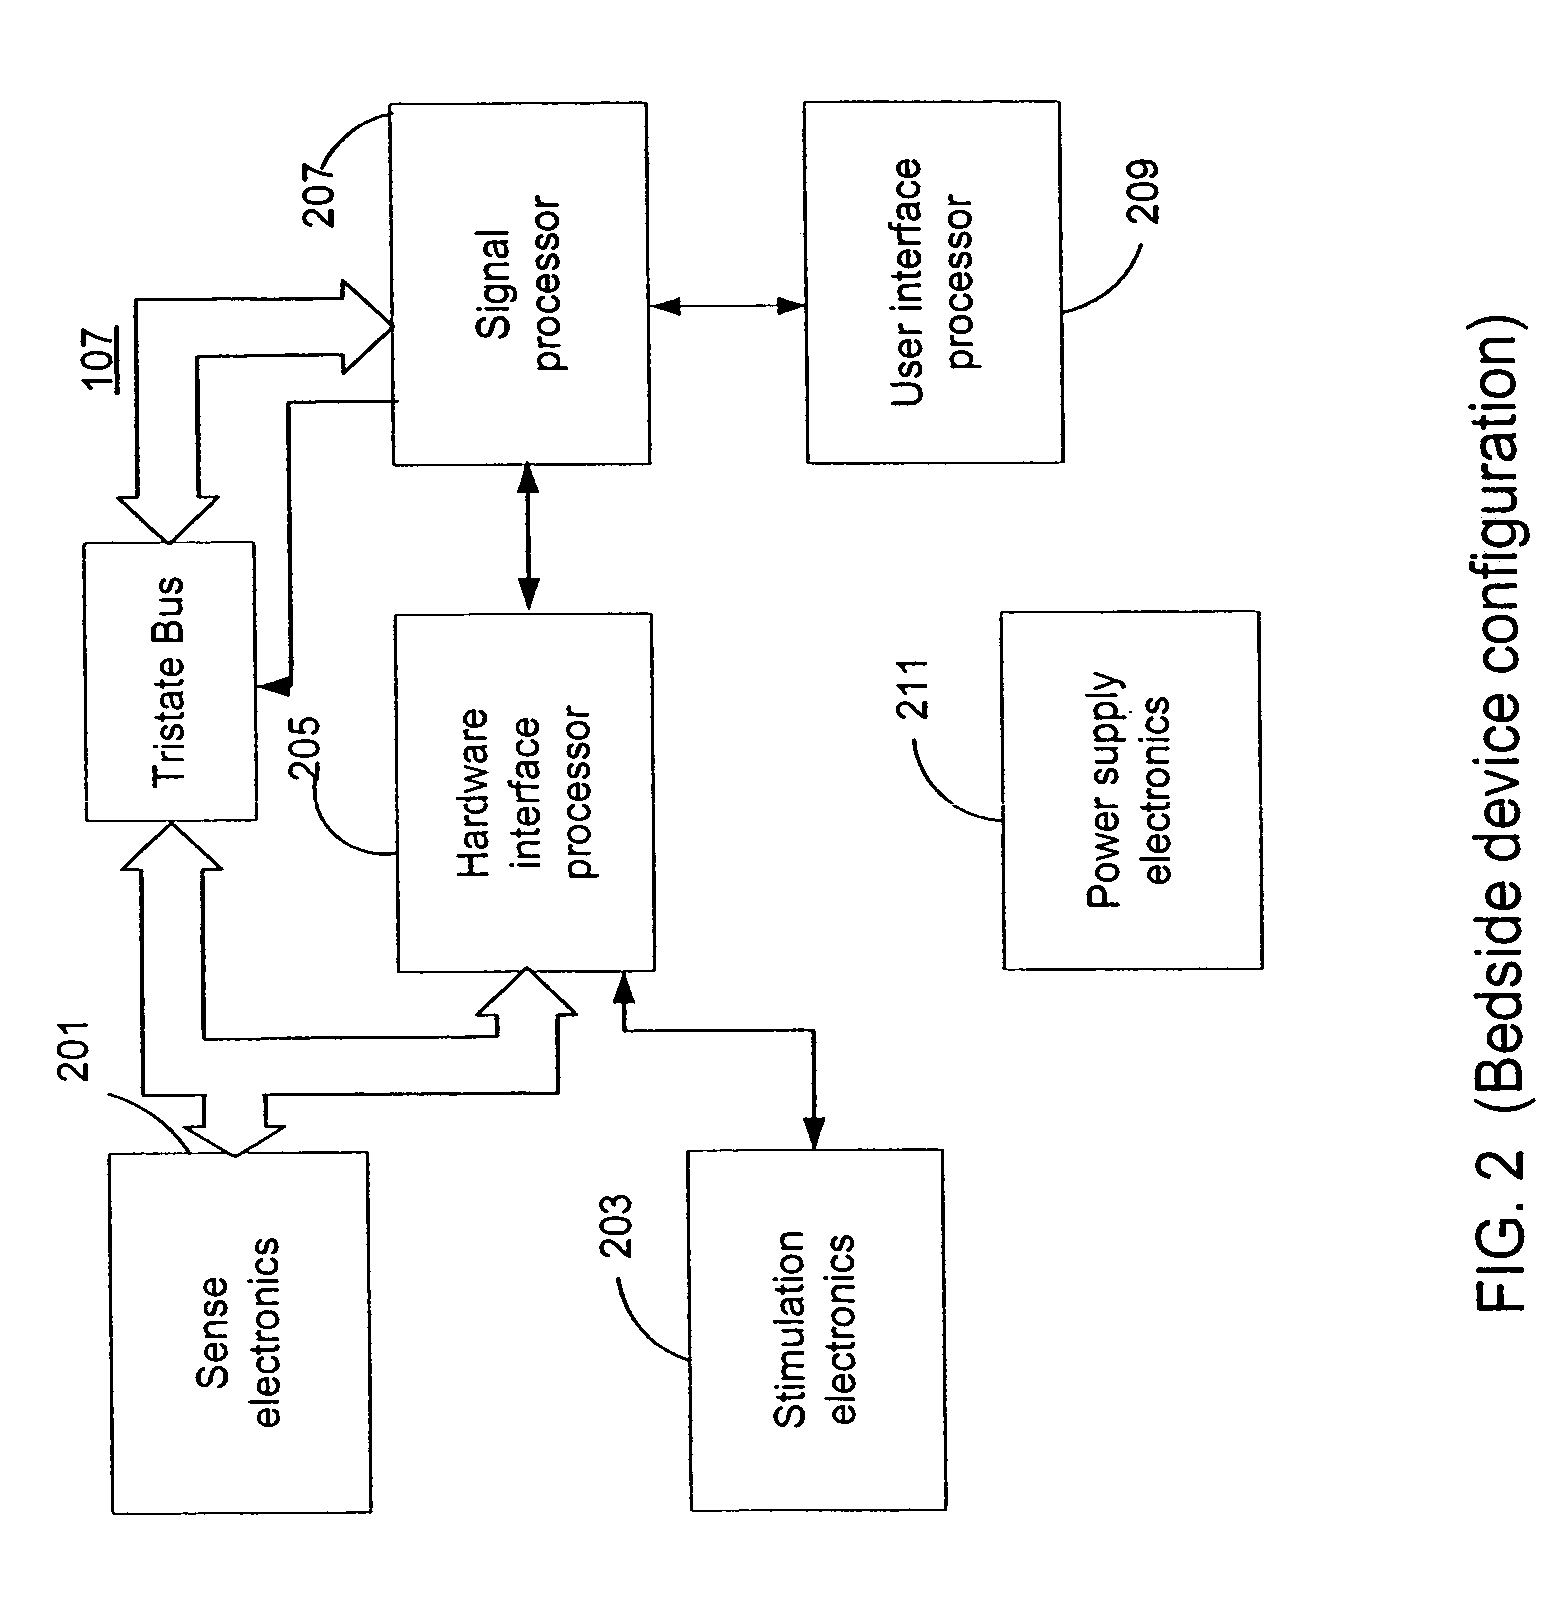 Multi-modal operation of a medical device system